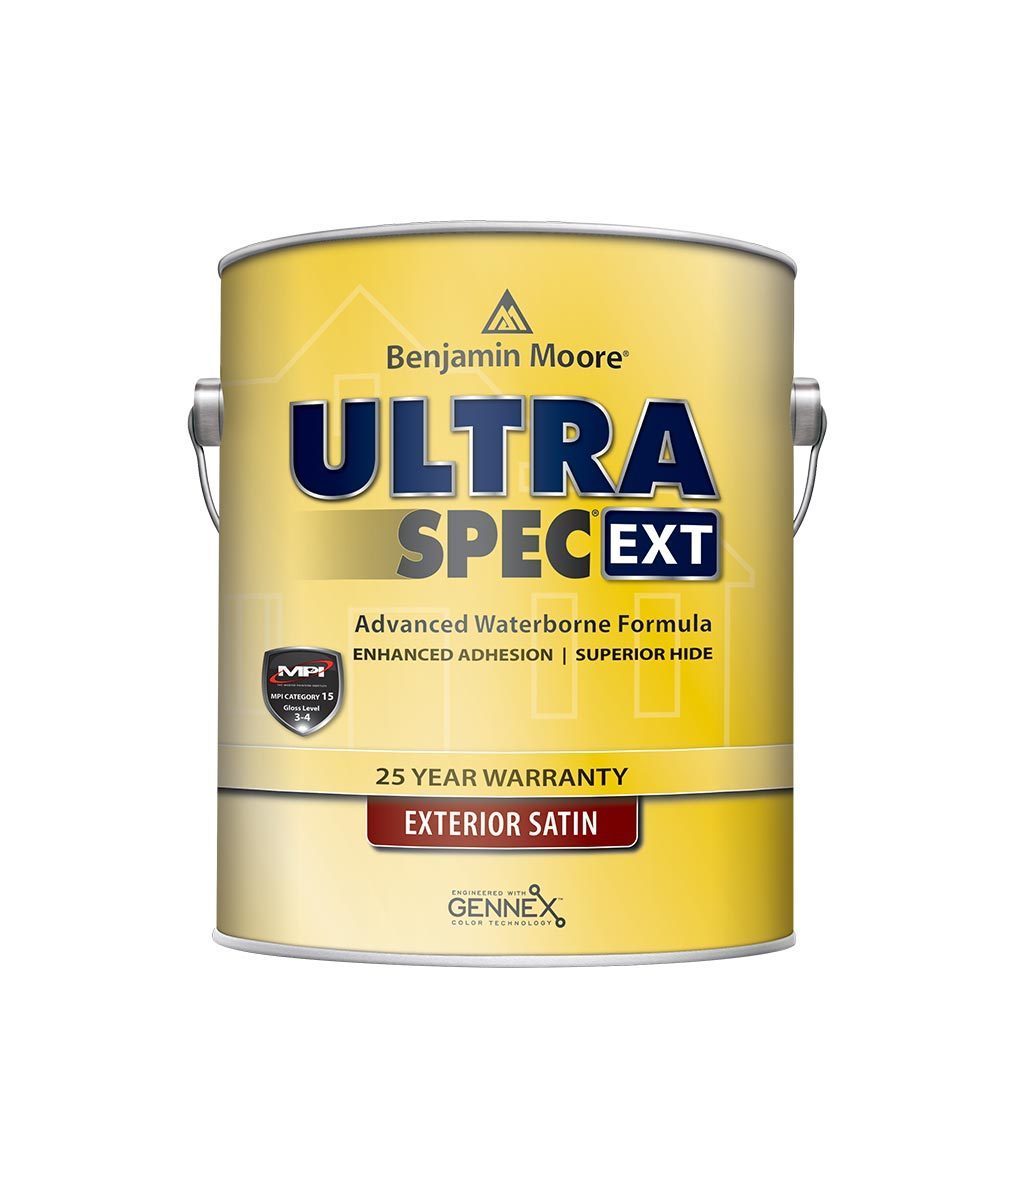 Benjamin Moore Ultra Spec EXT exterior paint in satin finish available at Regal Paint Centers